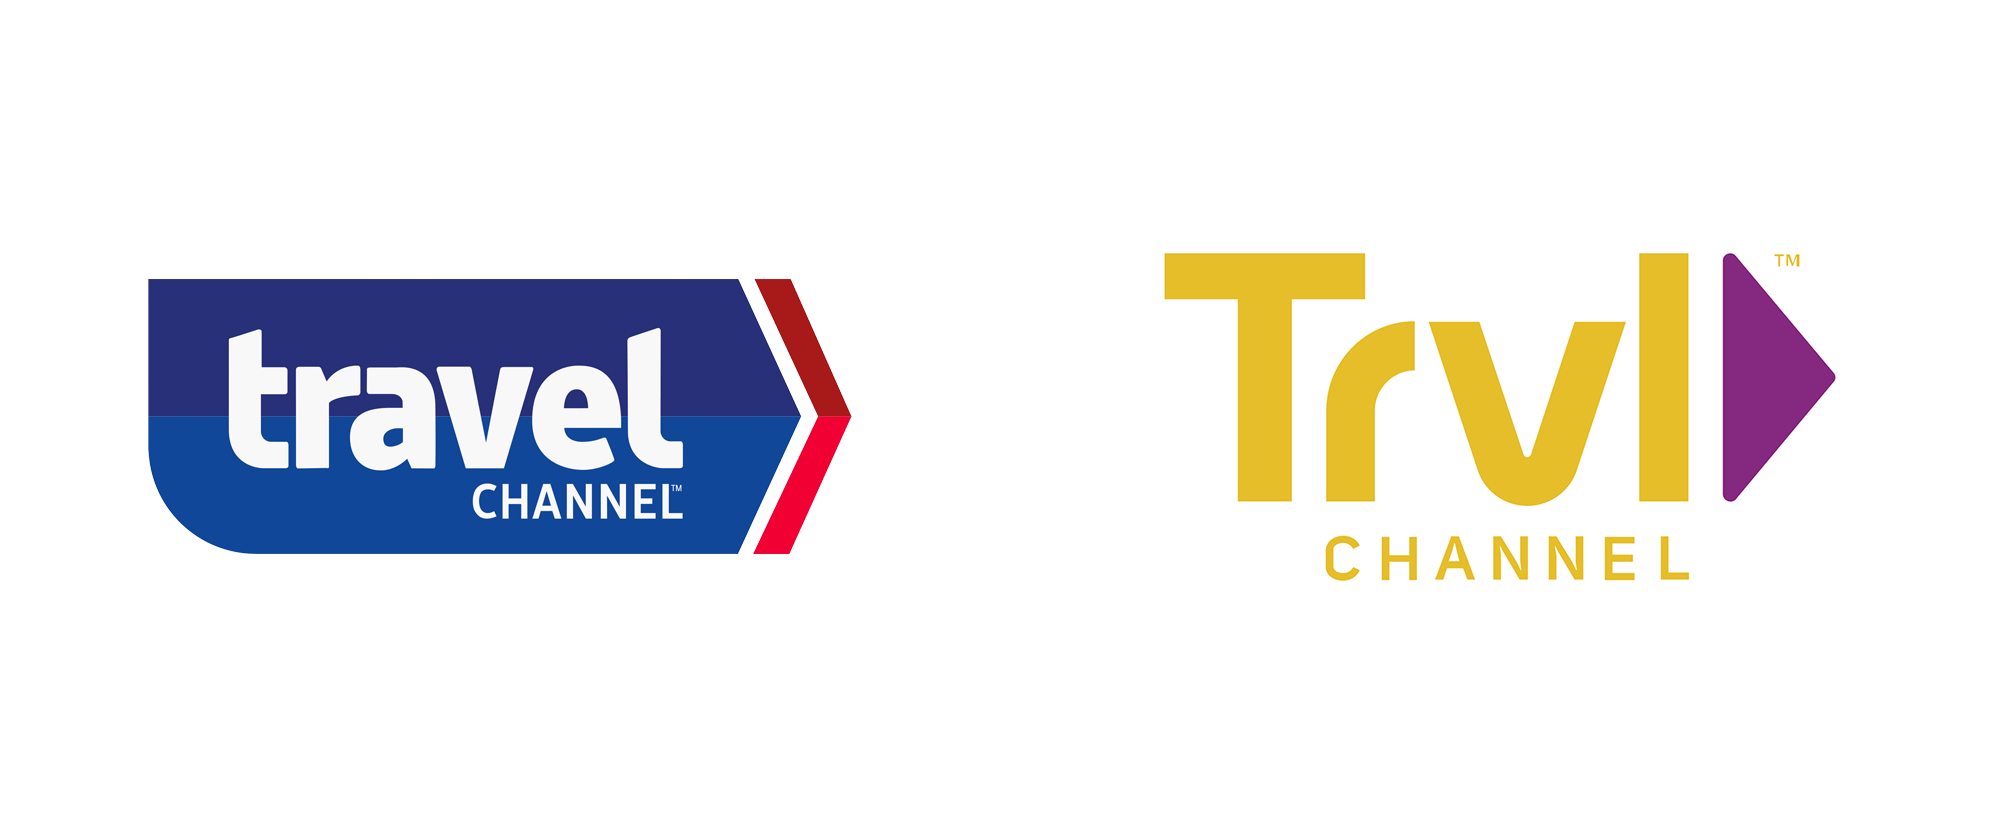 Travel Channel Logo - Brand New: New Logo for Travel Channel